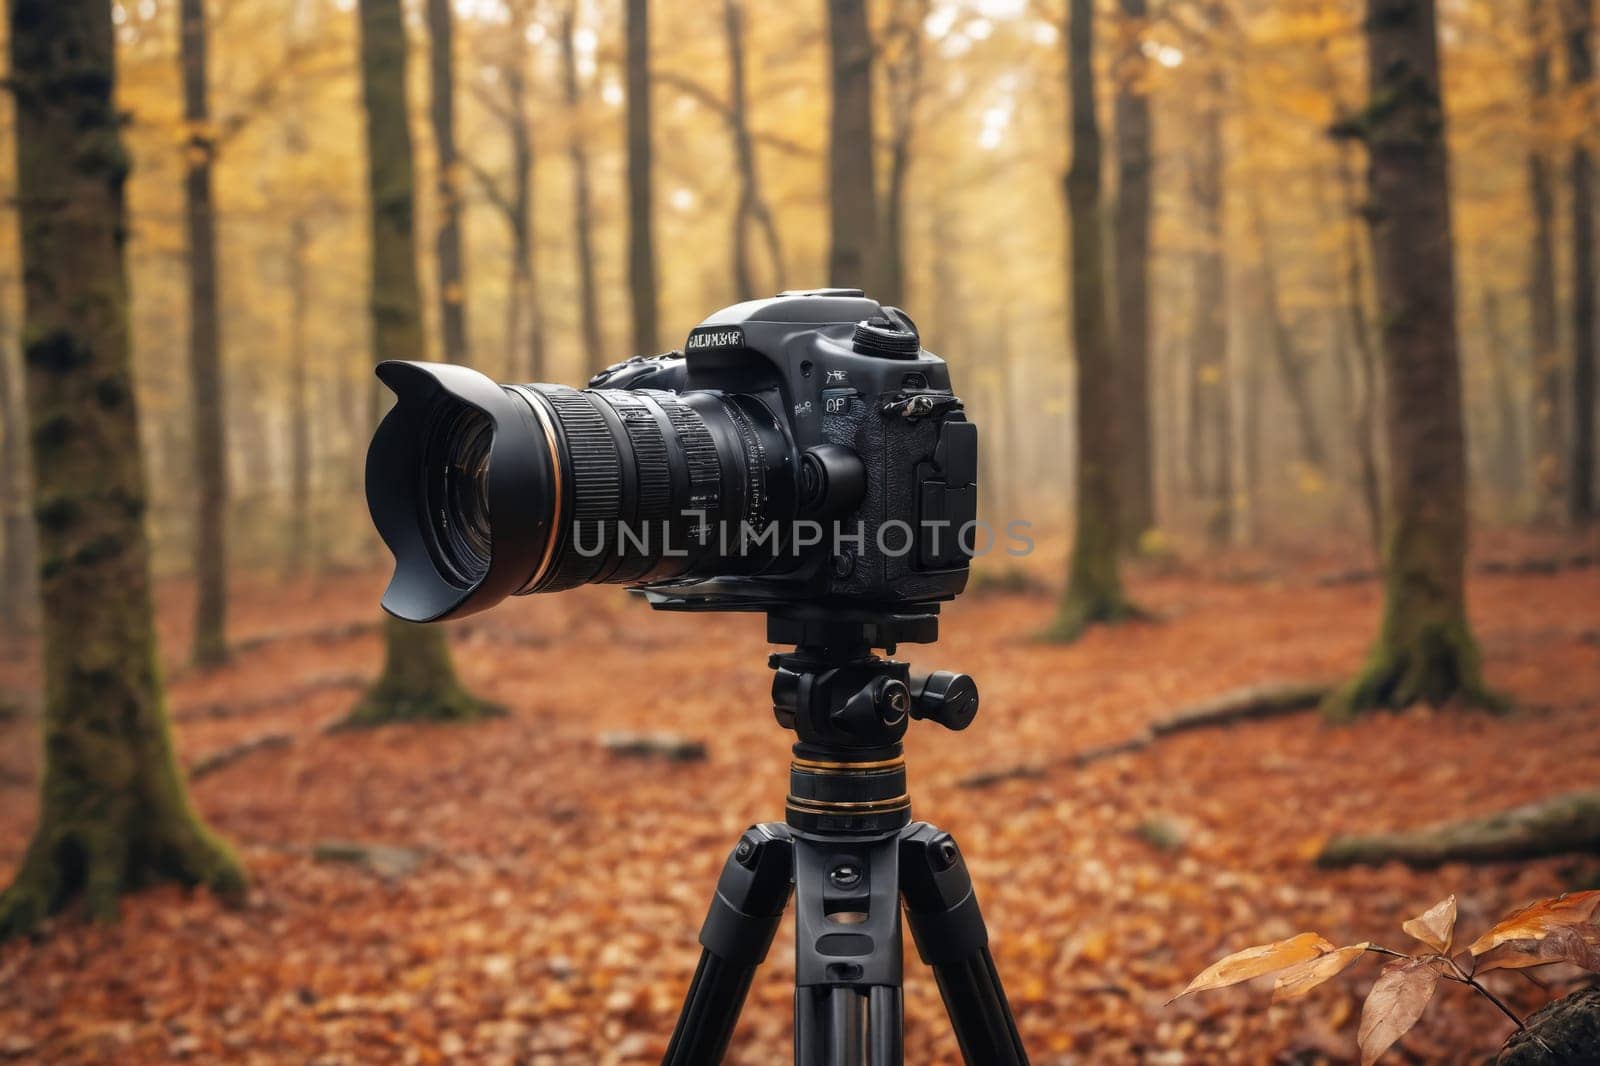 Nature's Photographer: Camera on a Tripod in the Shaded Woods by Andre1ns